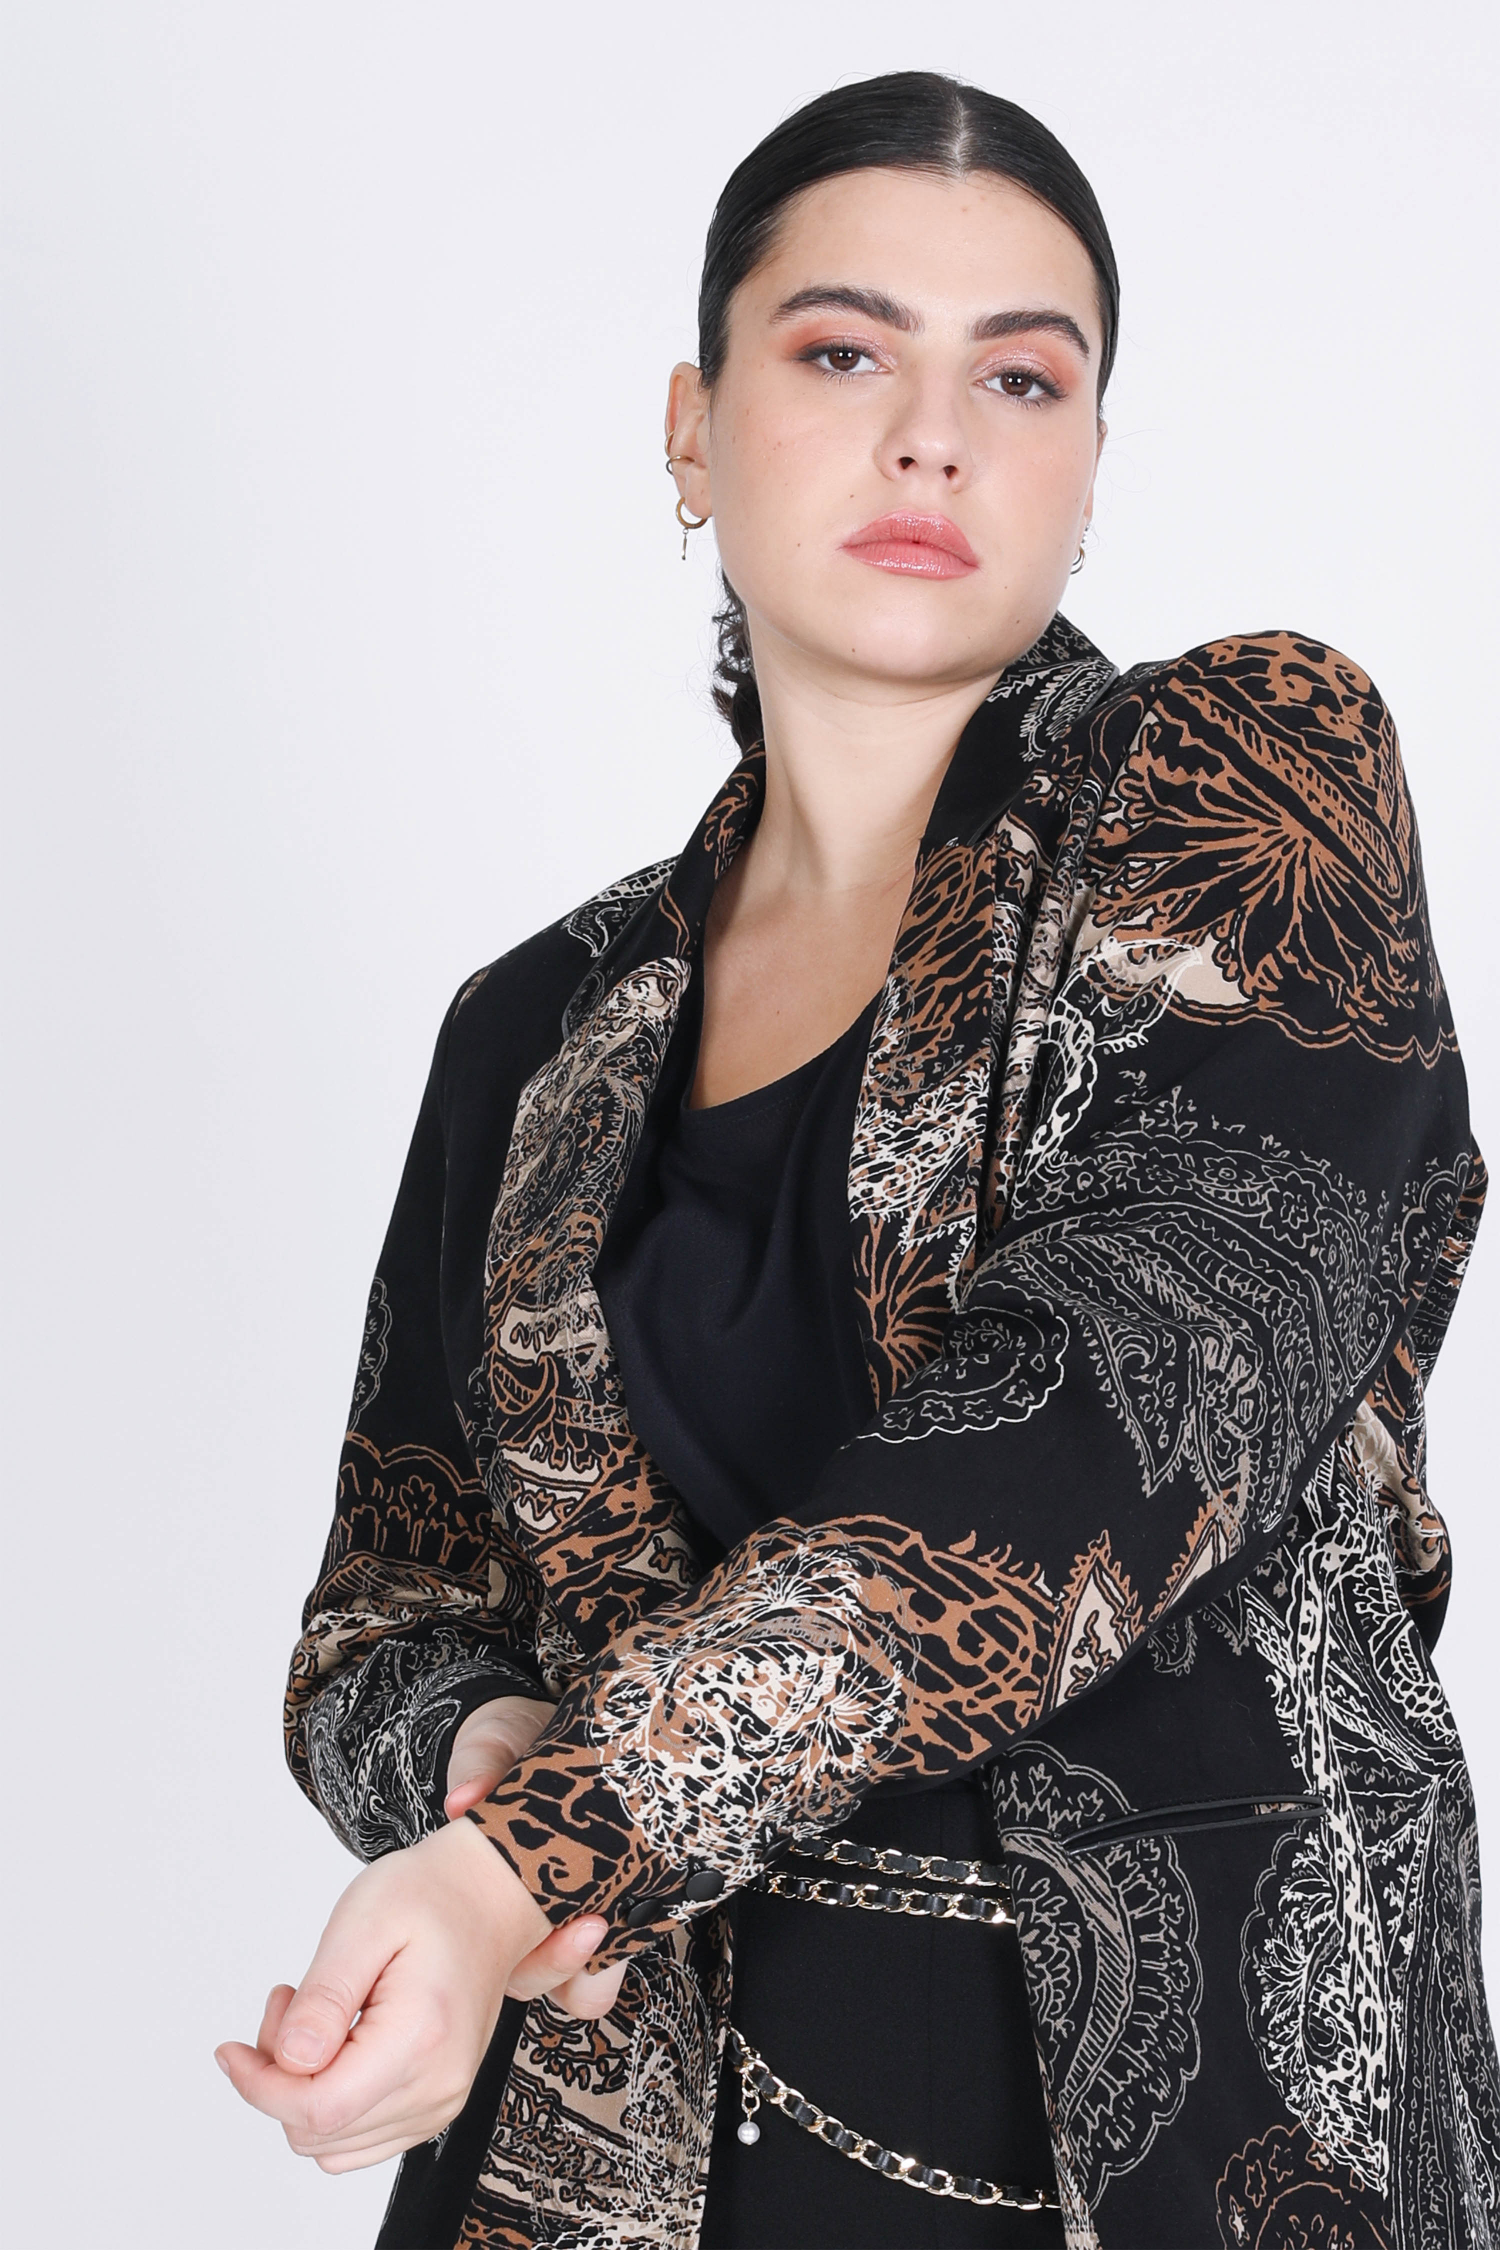 Printed corduroy suit jacket in eco-responsible fabric